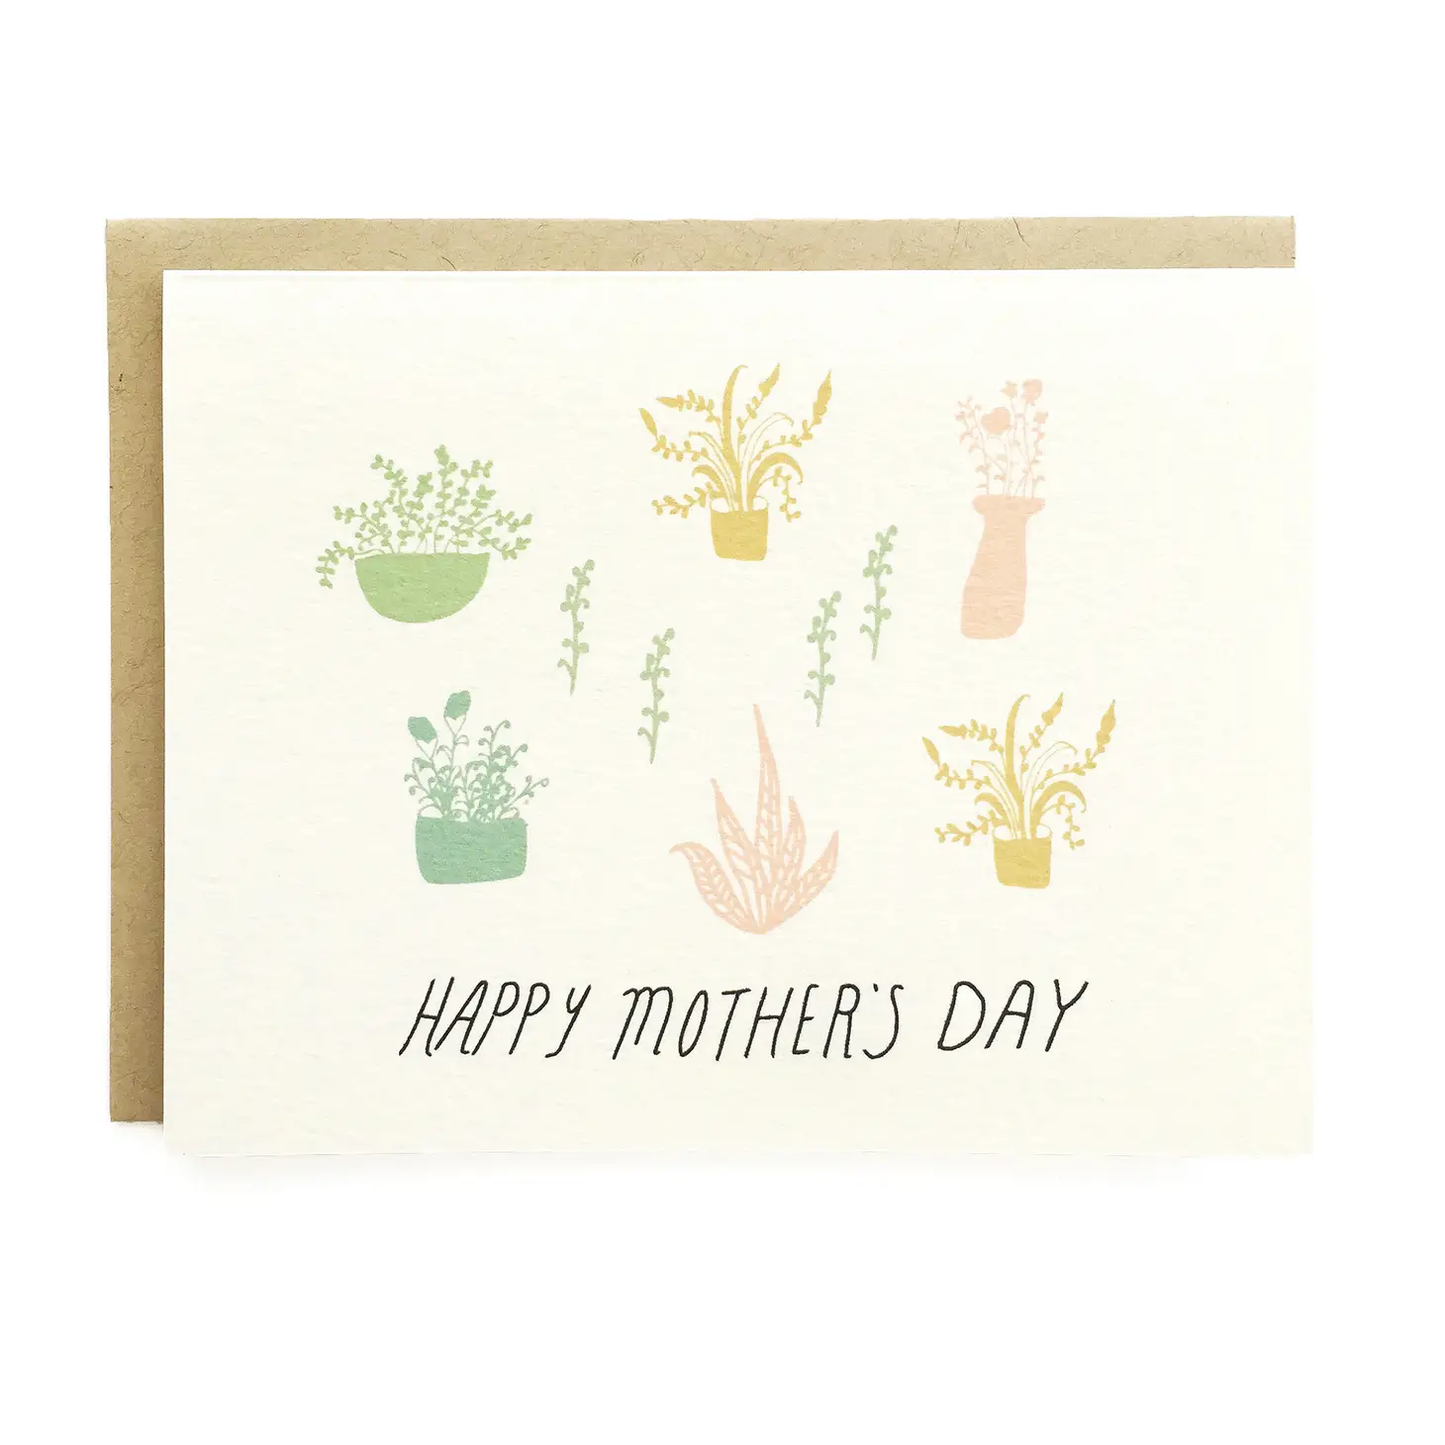 NICOLE MONK Greeting Cards